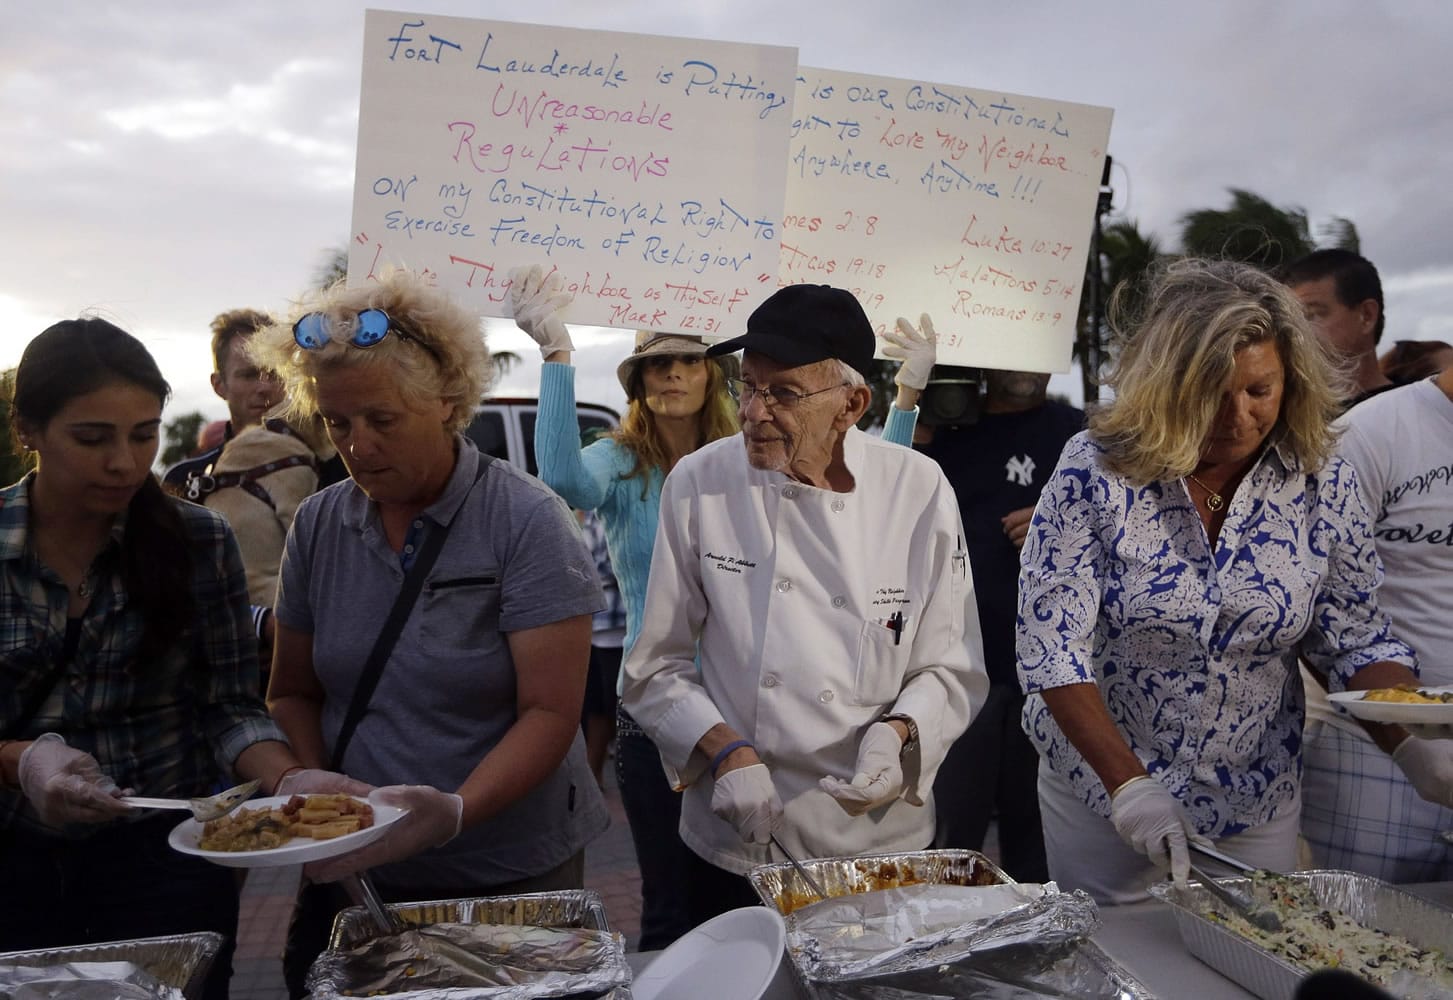 Homeless advocate Arnold Abbott, 90, director of the nonprofit group Love Thy Neighbor Inc., center, serves food to the homeless with the help of volunteers from a public parking lot next to the beach Wednesday in Fort Lauderdale, Fla.